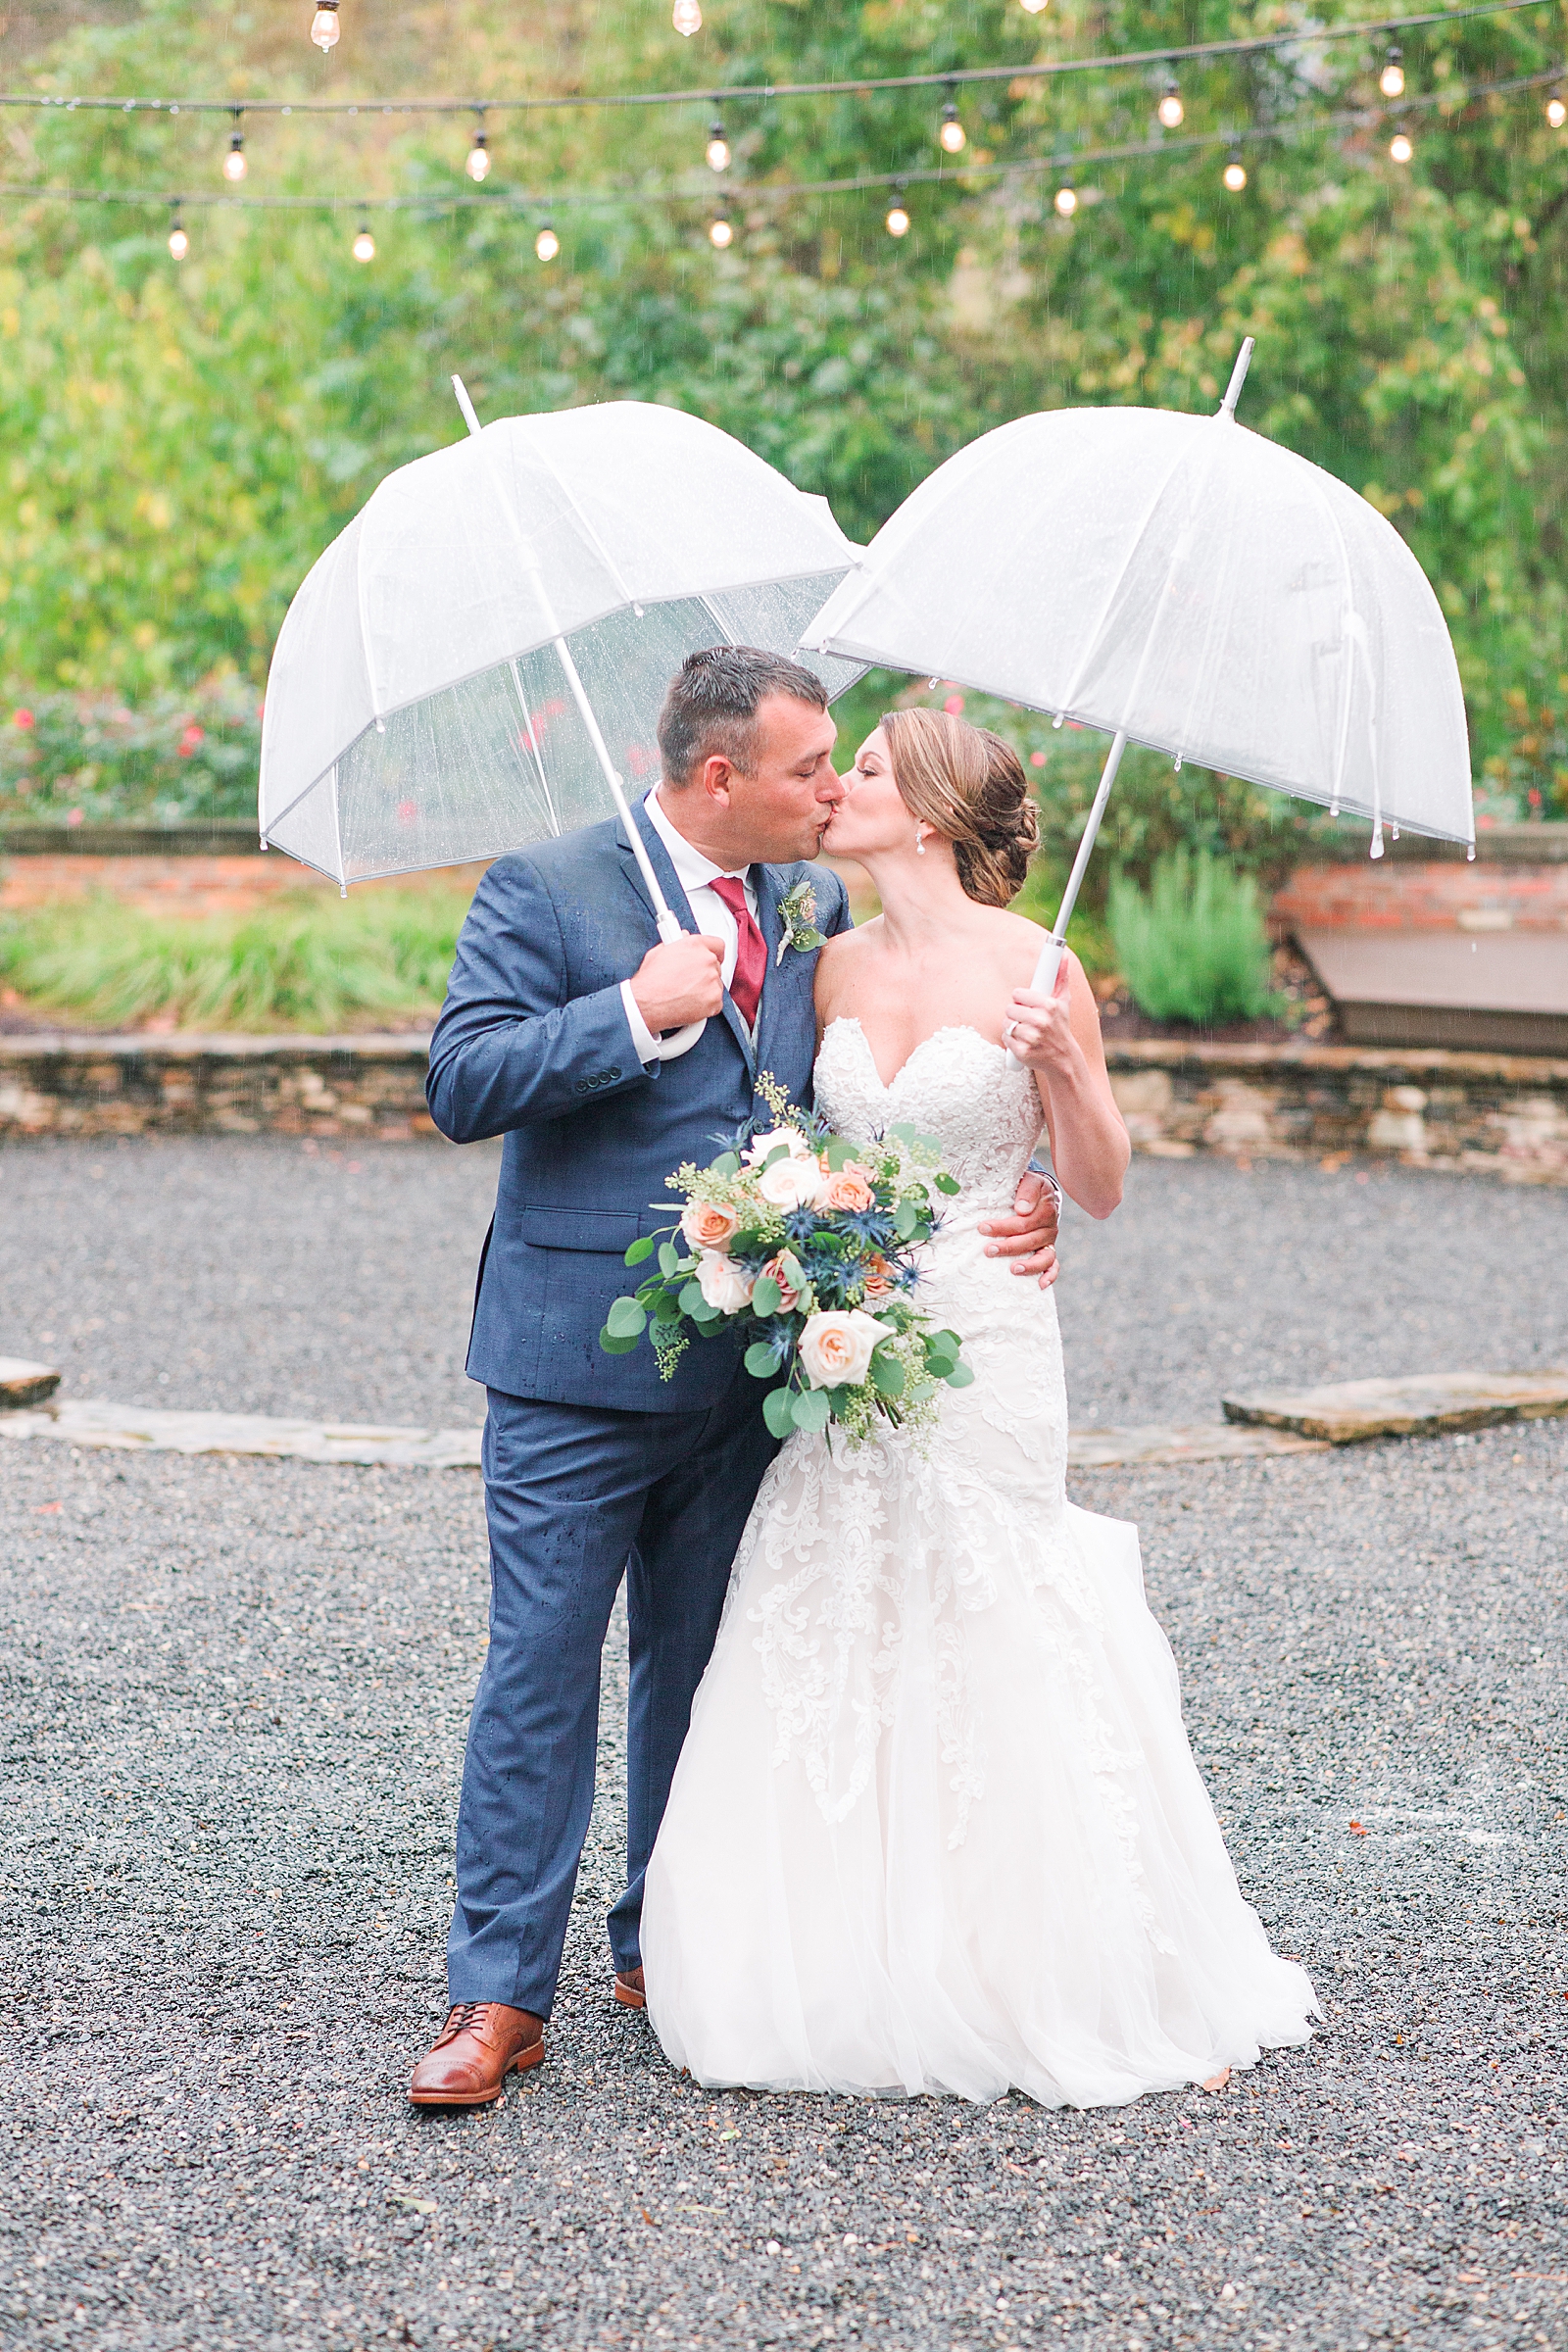 The Hackney Warehouse Bride and Groom Kissing Under Umbrellas in The Rain Photo